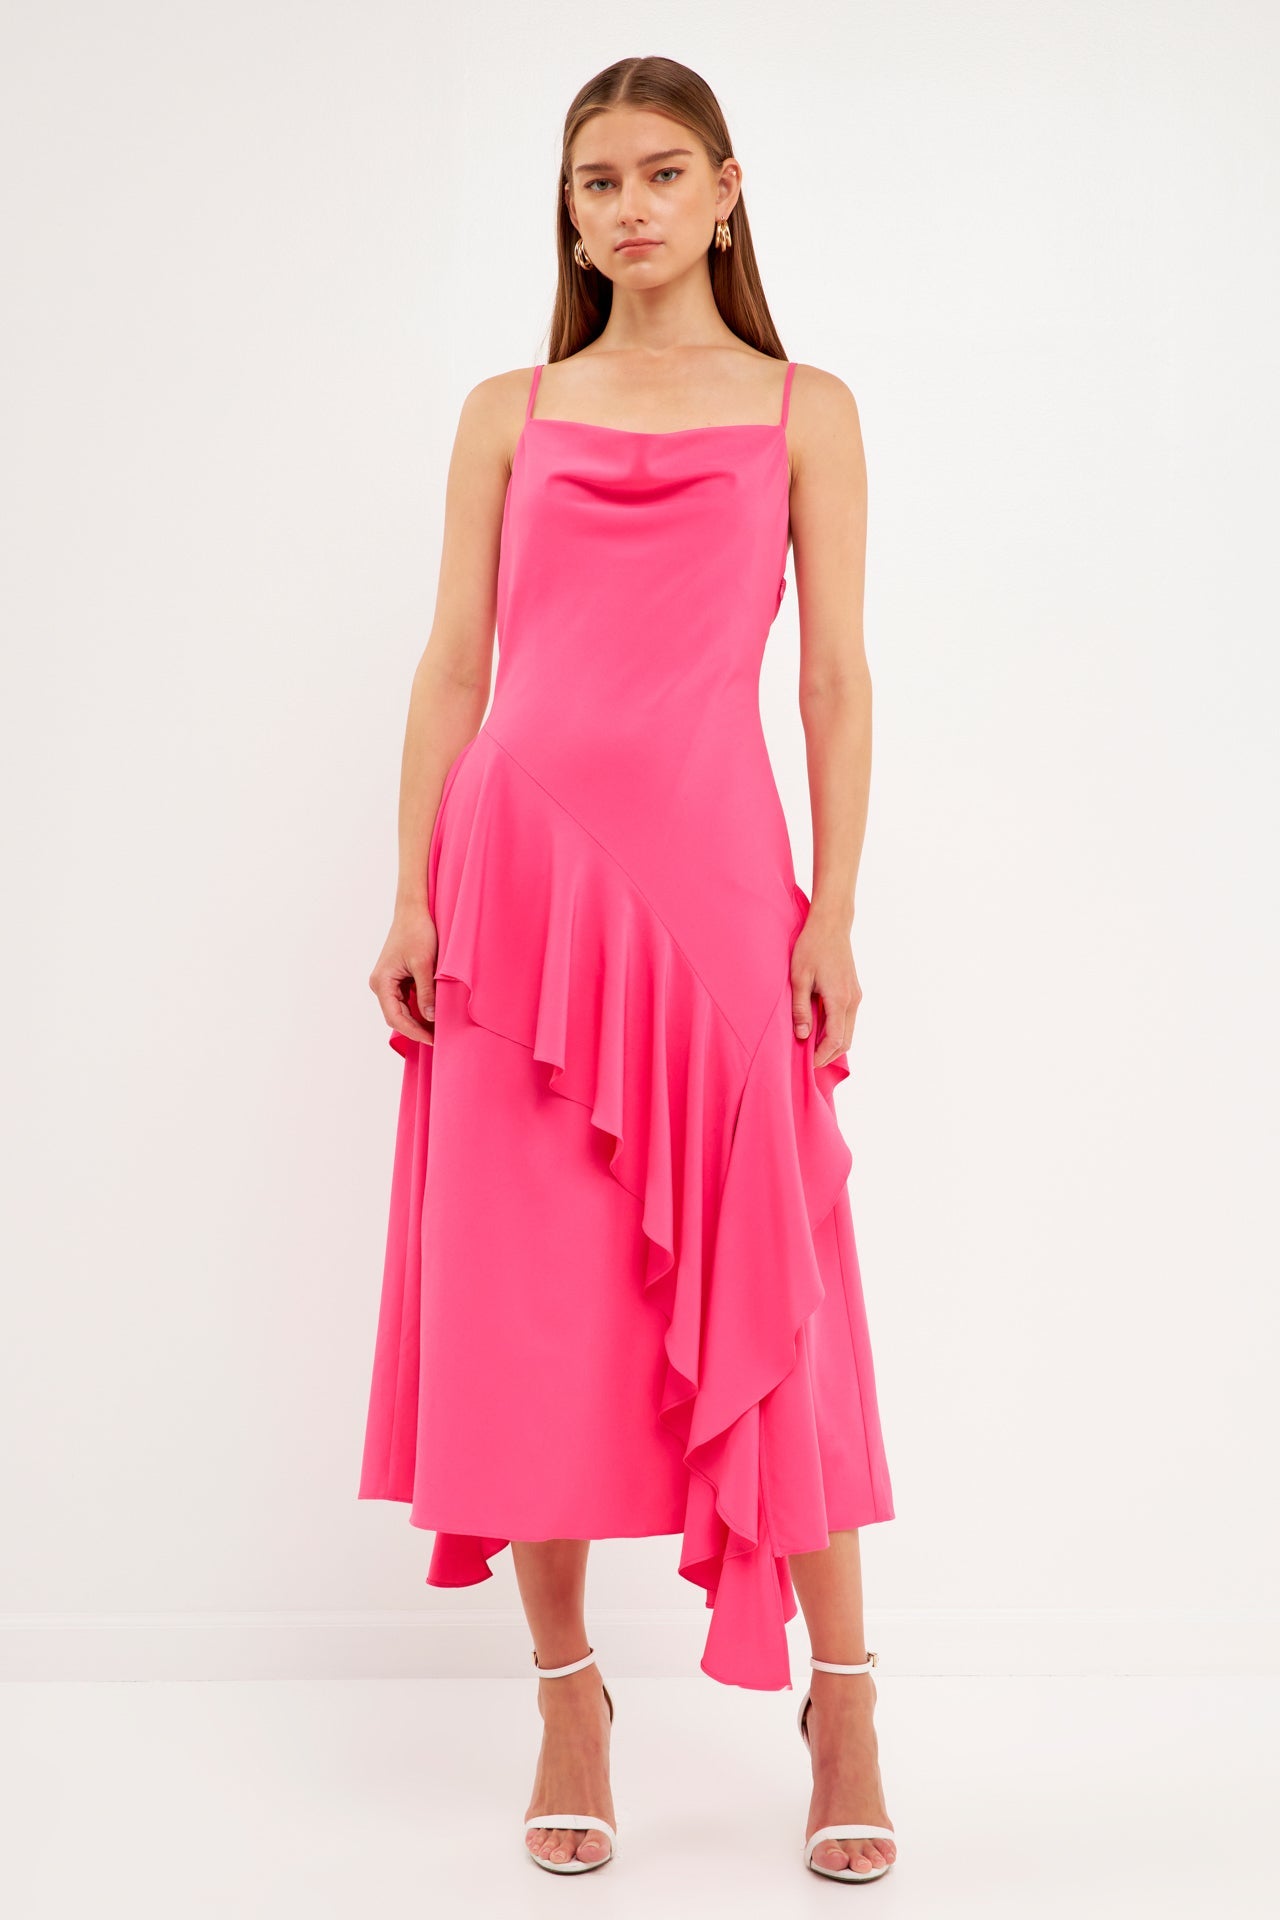 Endless Rose - Waterfall Maxi Dress - Dresses in Women's Clothing available at endlessrose.com